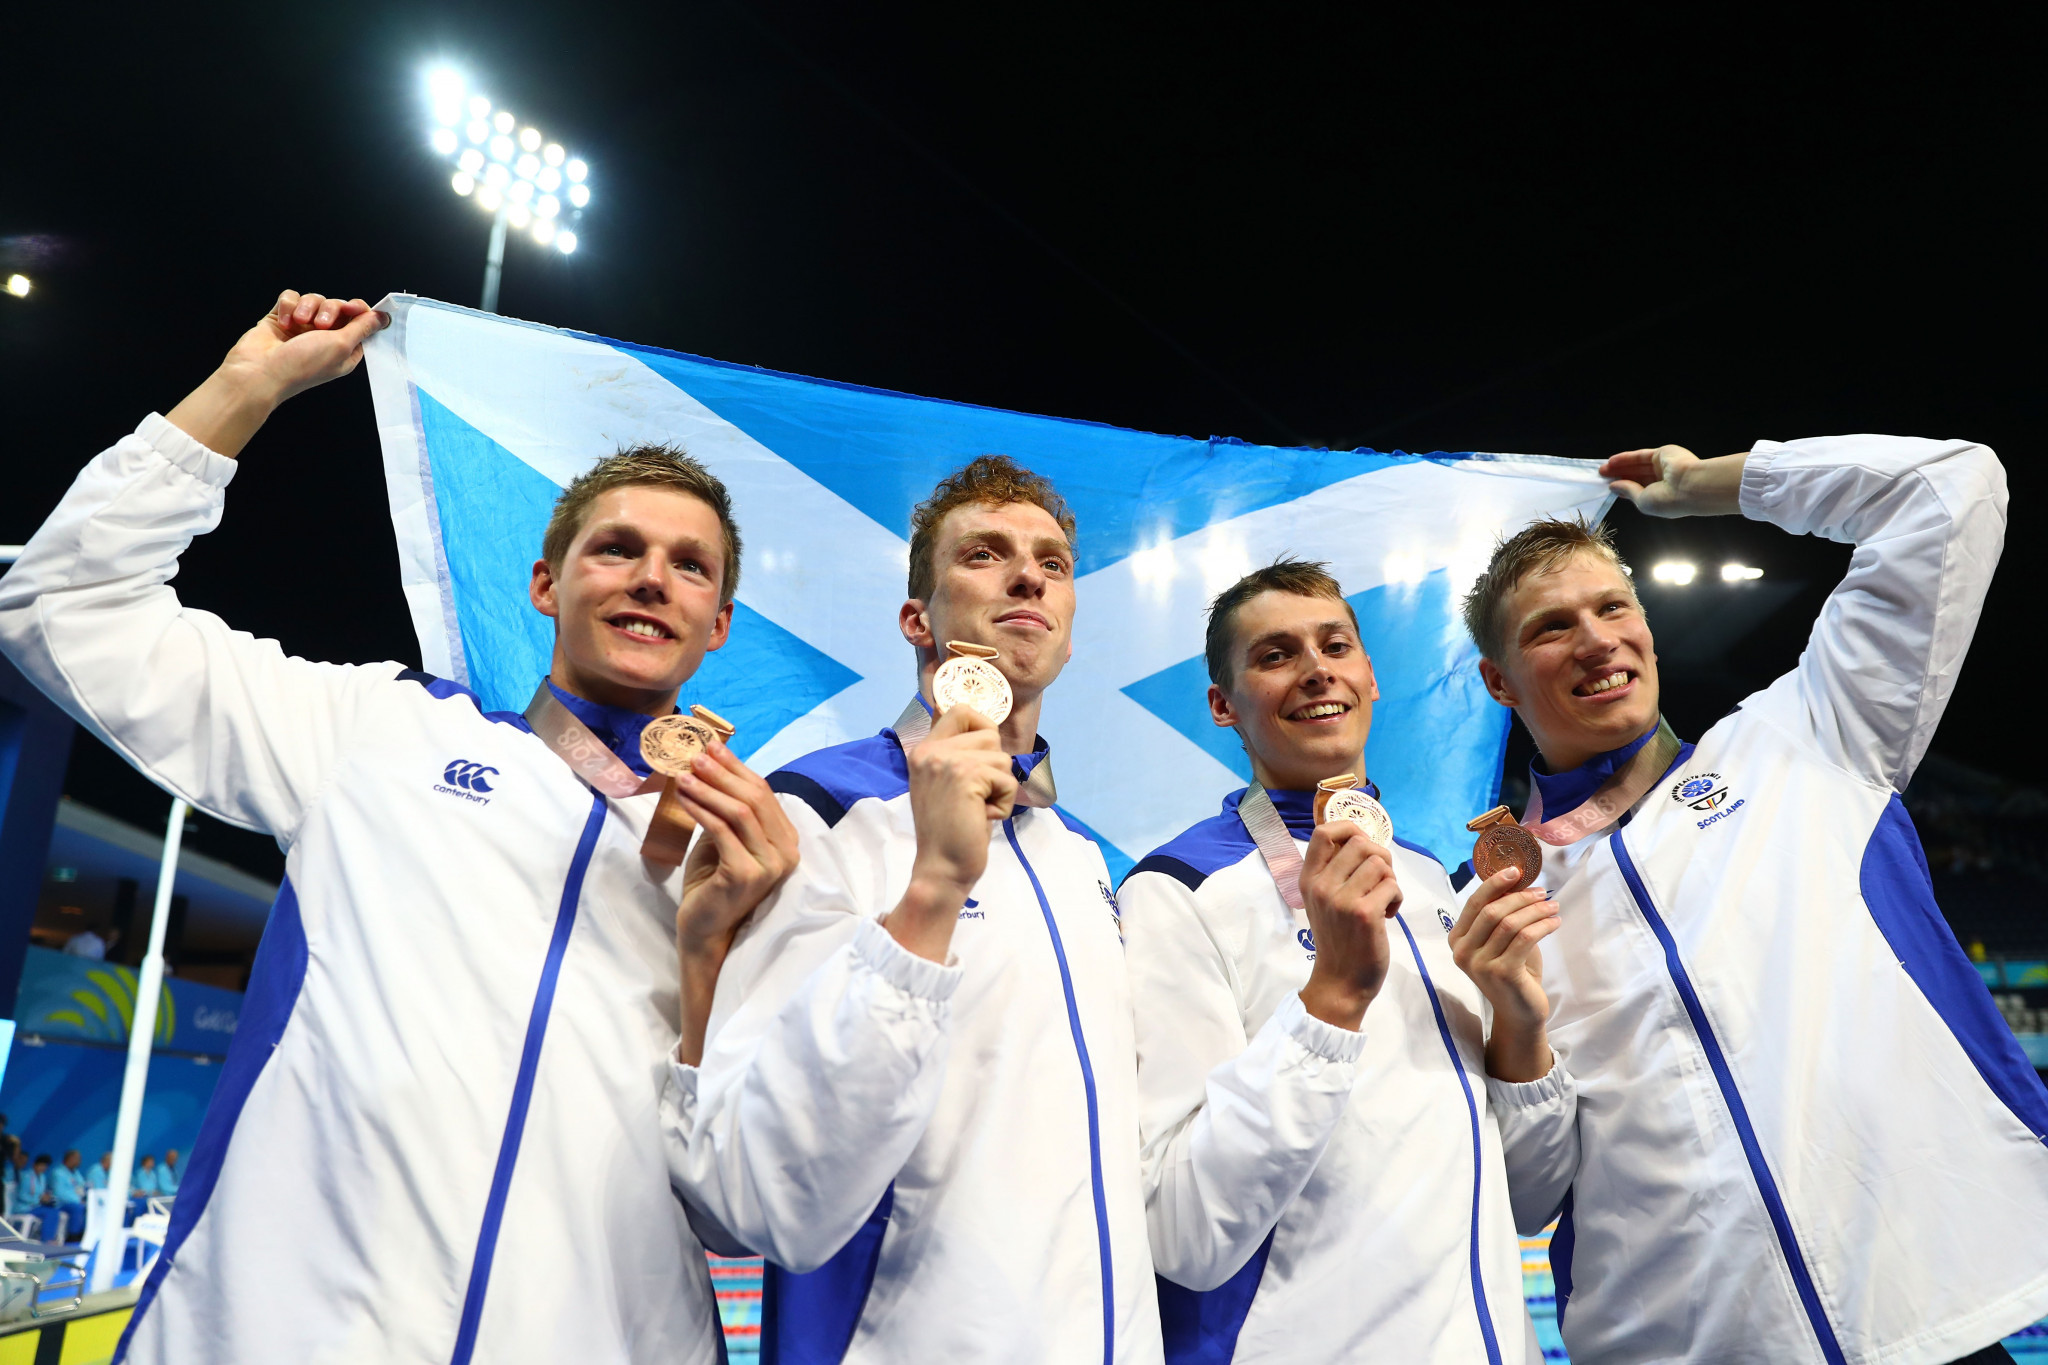 Dan Wallace, second left, won two bronze medals at Gold Coast 2018 ©Getty Images